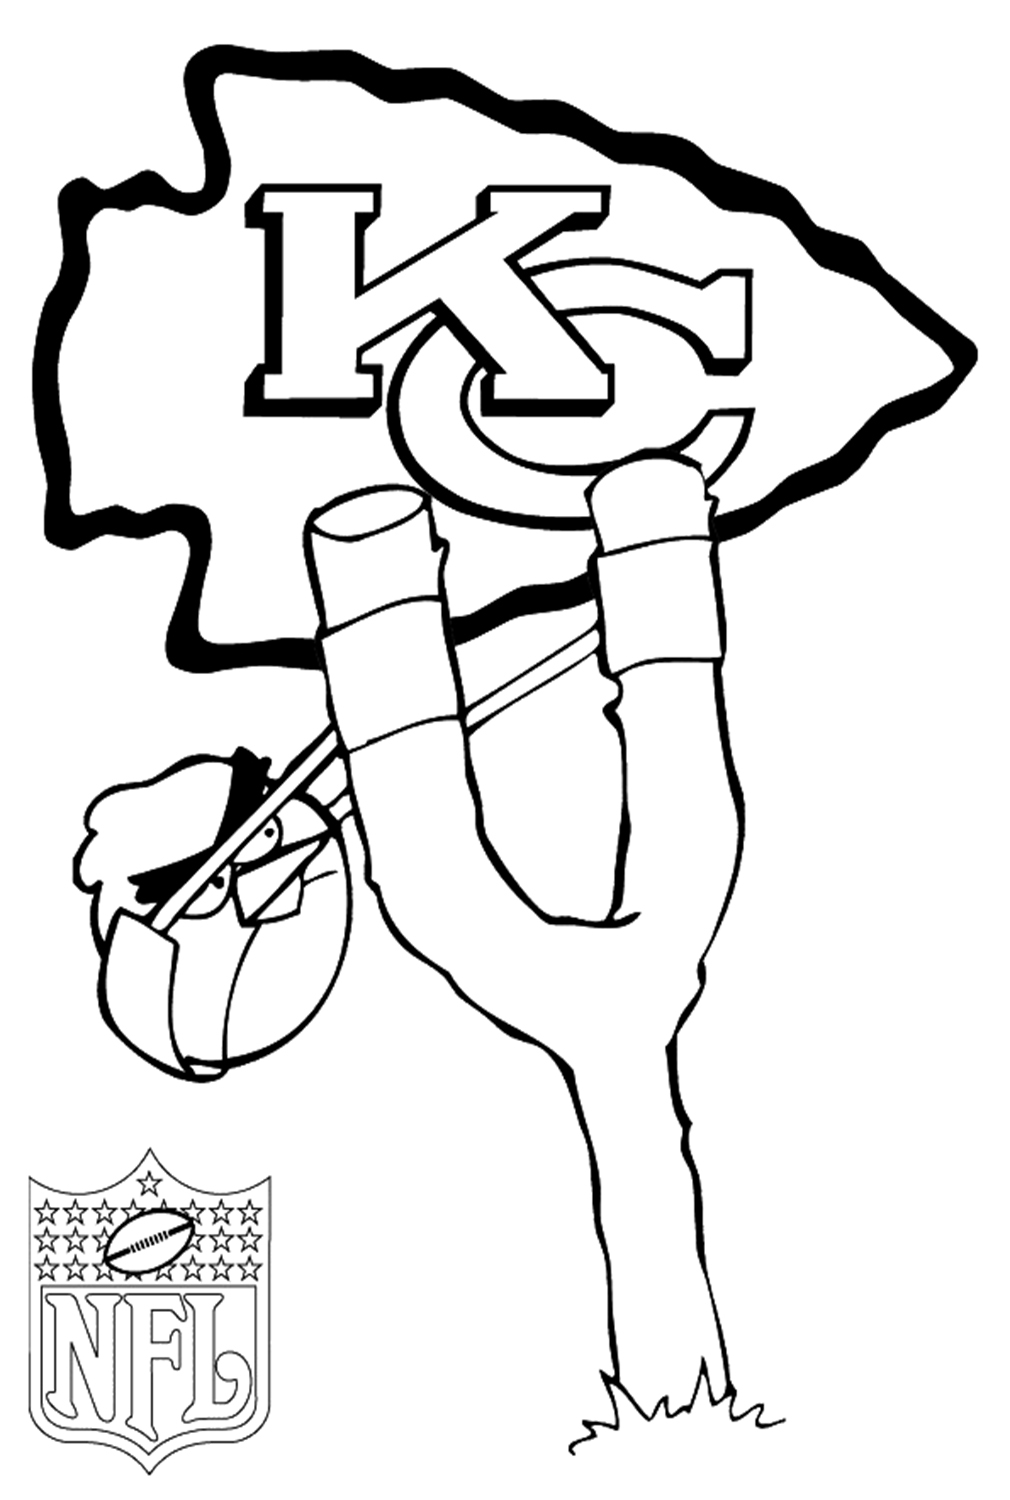 Kansas City Chiefs With Angry Birds Coloring Page